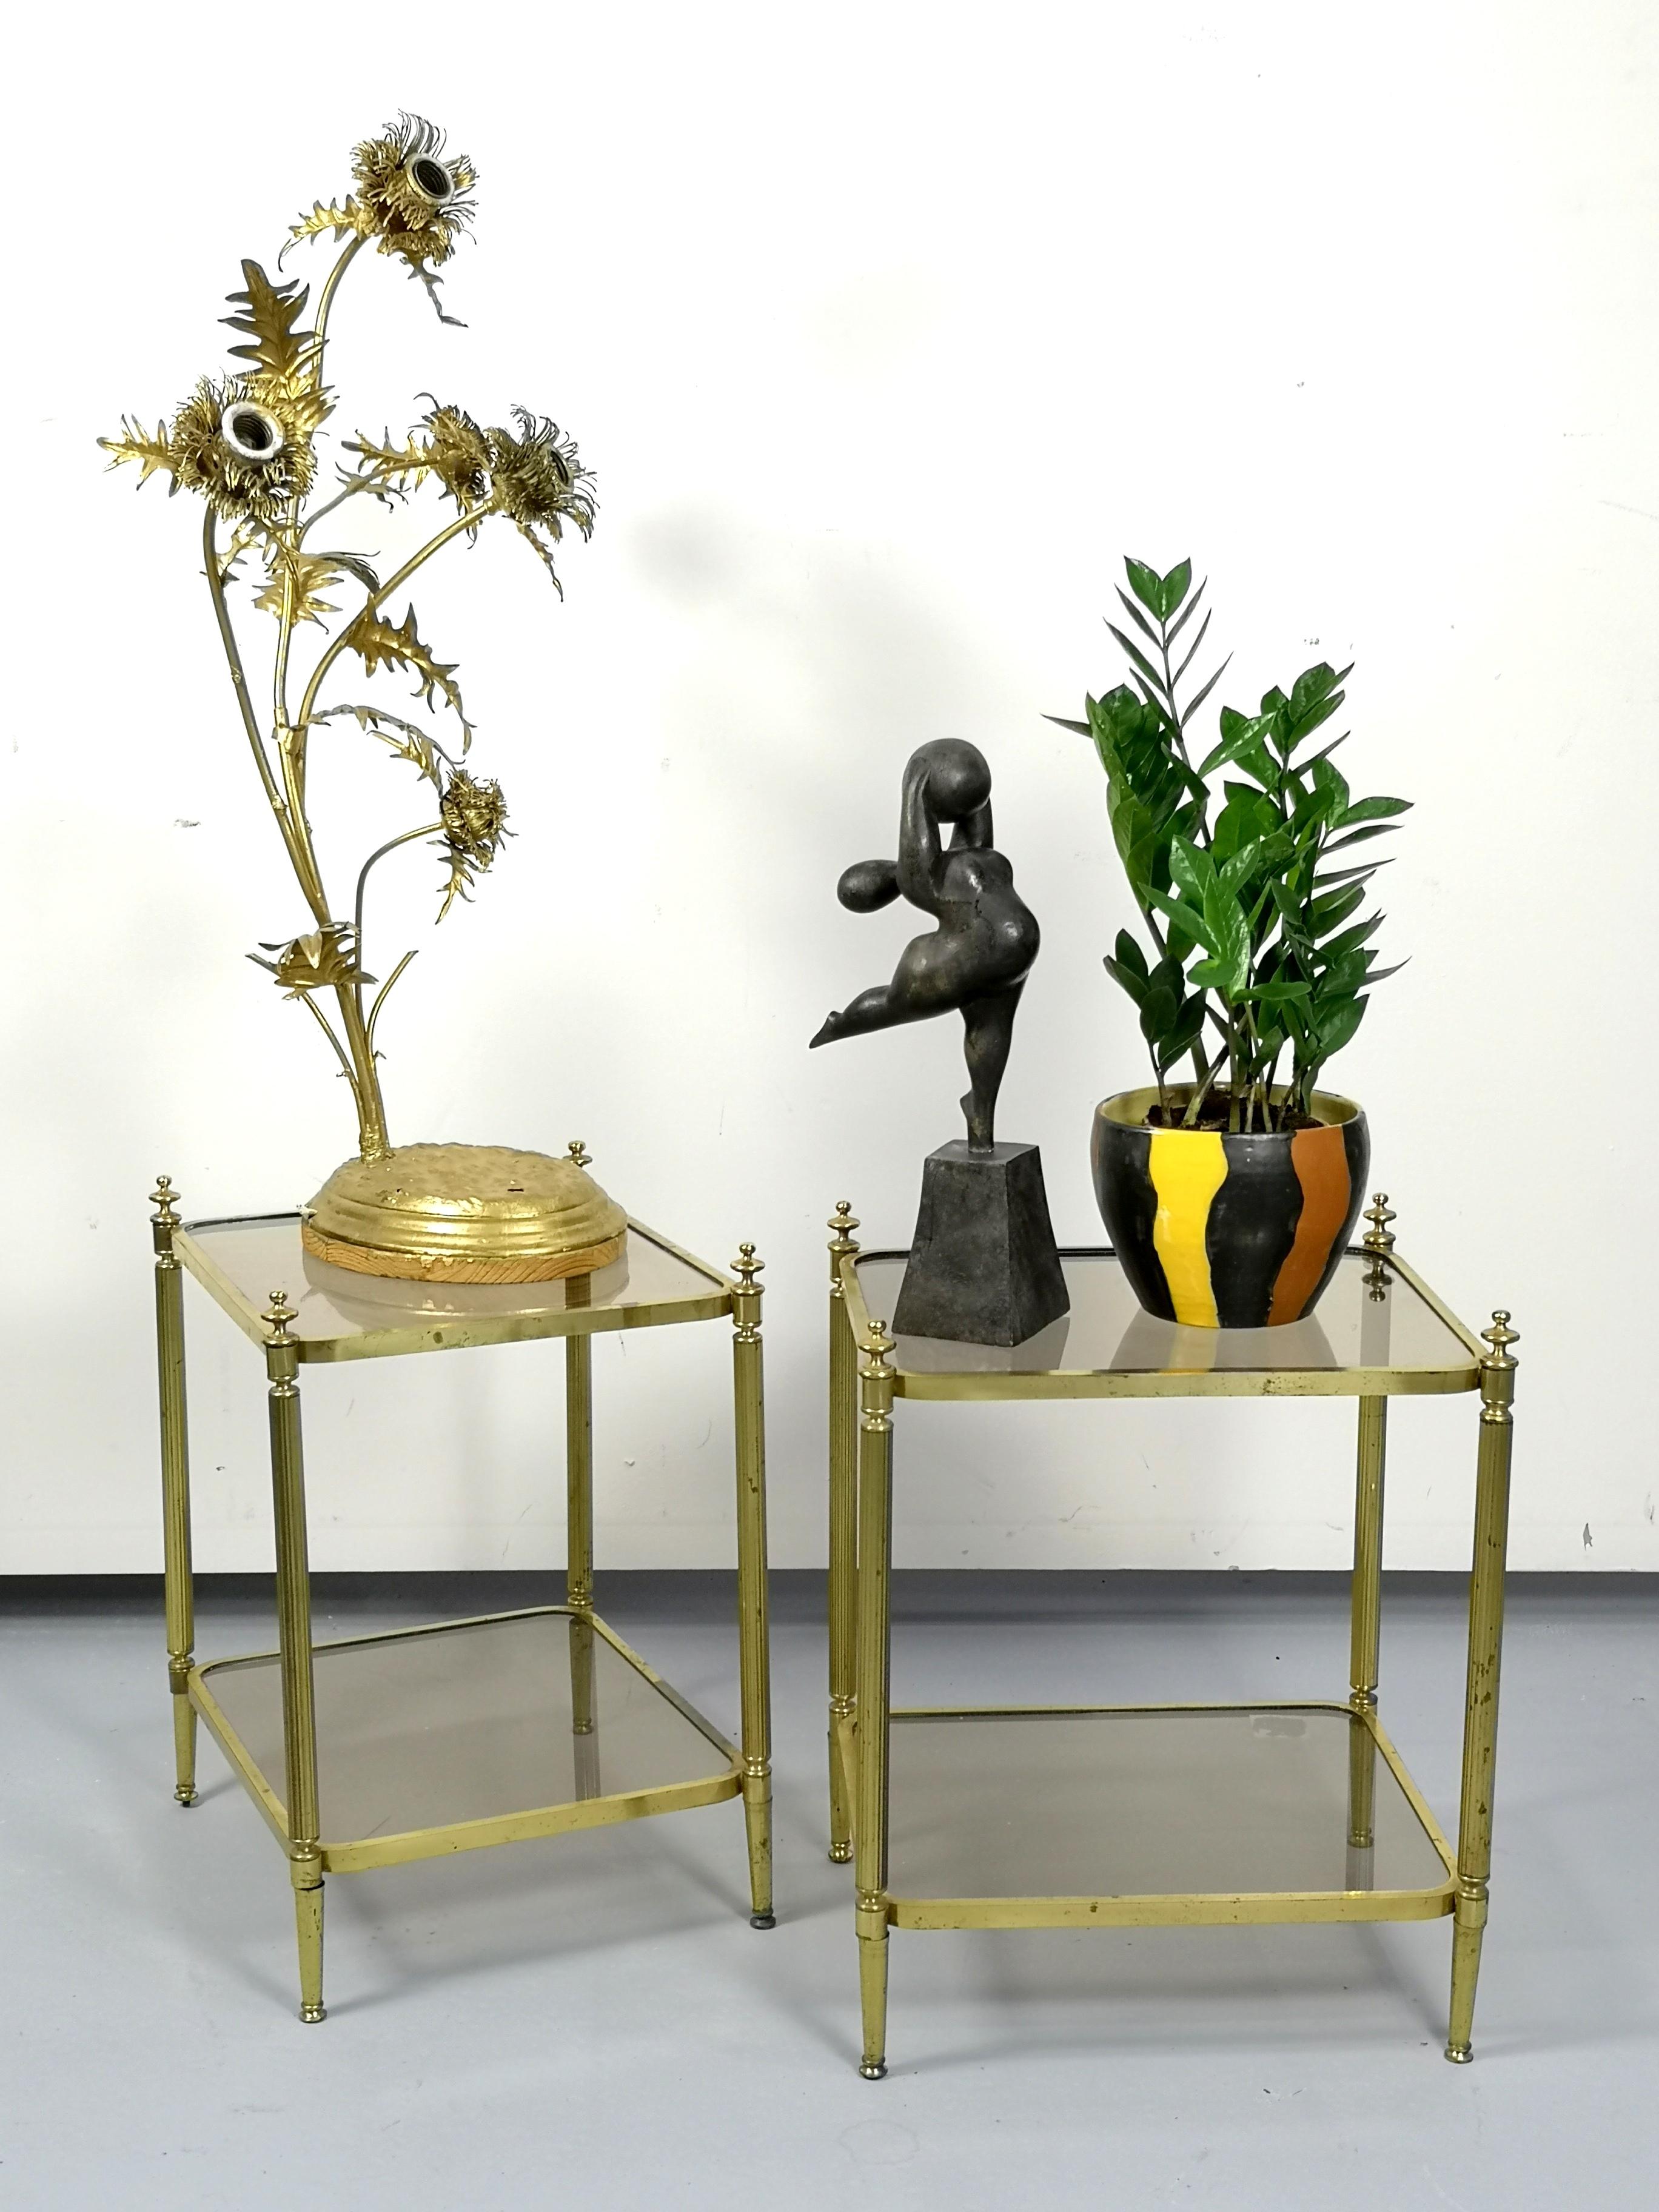 Modern empire style, the brass side tables are vintage pieces from the 1970s.